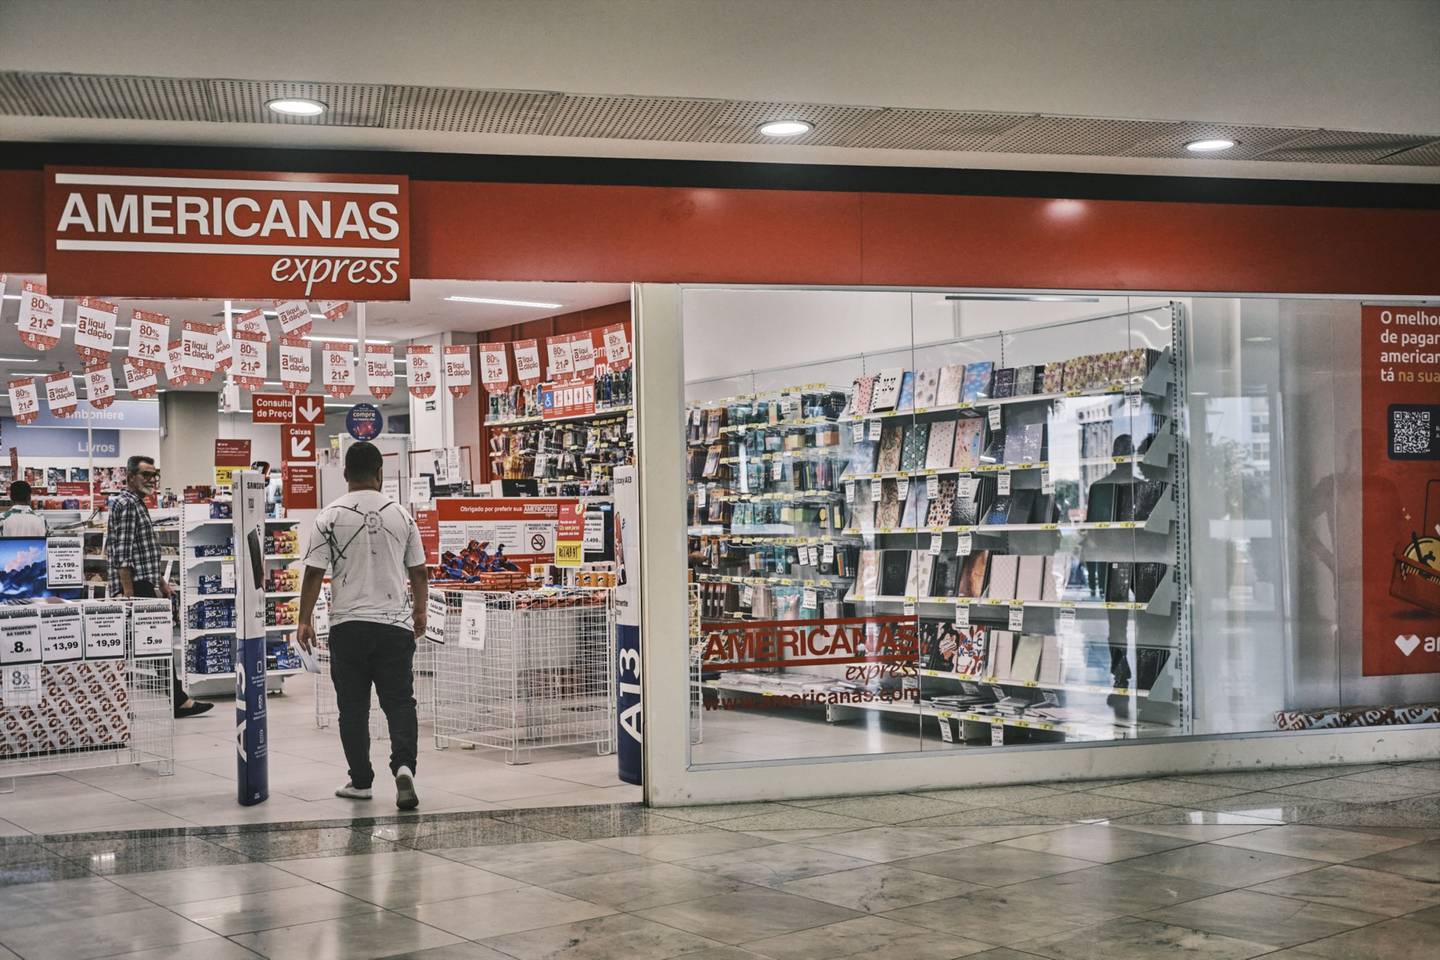 Americanas faces eviction for non-payment of rent at a São Paulo mall